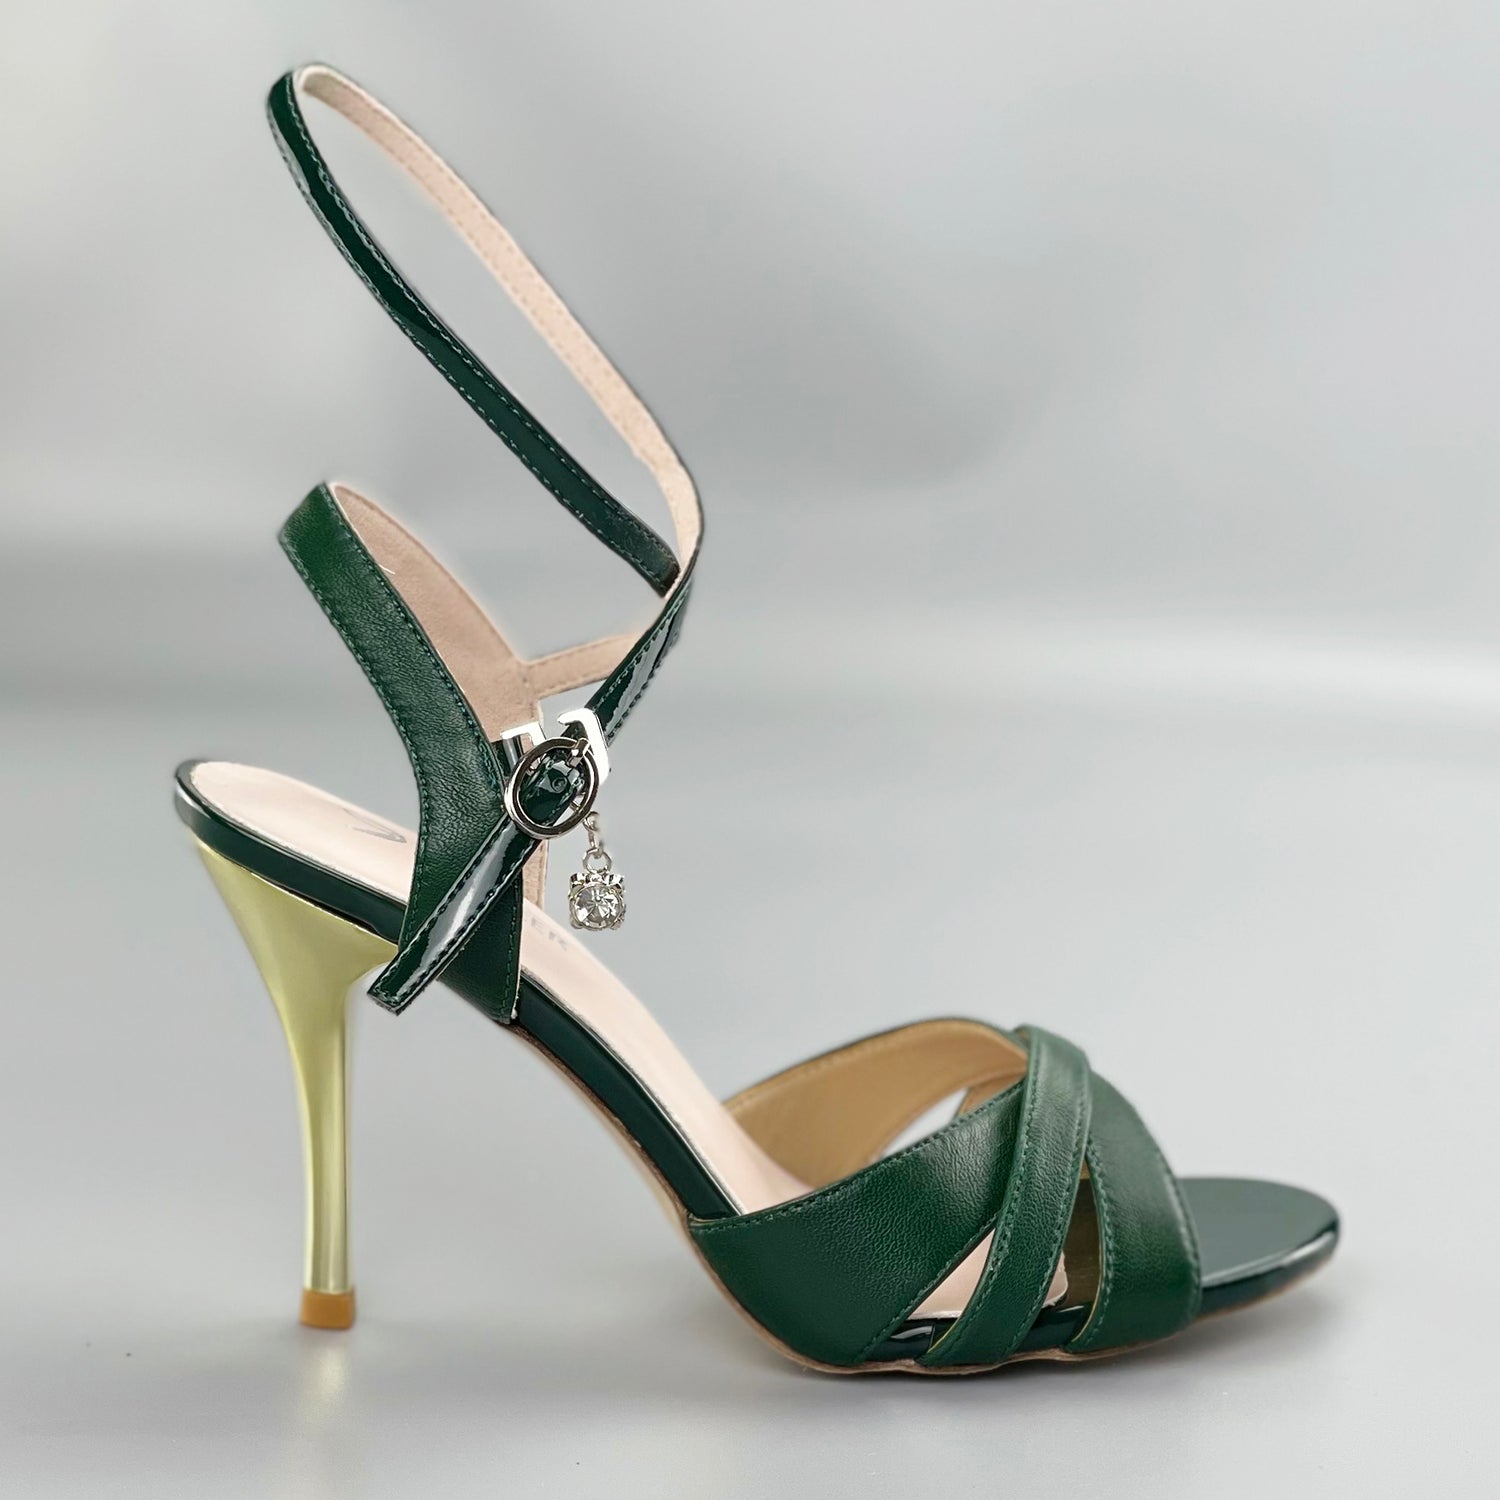 Pro Dancer Green Peep-toe Argentine Tango Shoes with Closed-back High Heels and Hard Leather Sole3